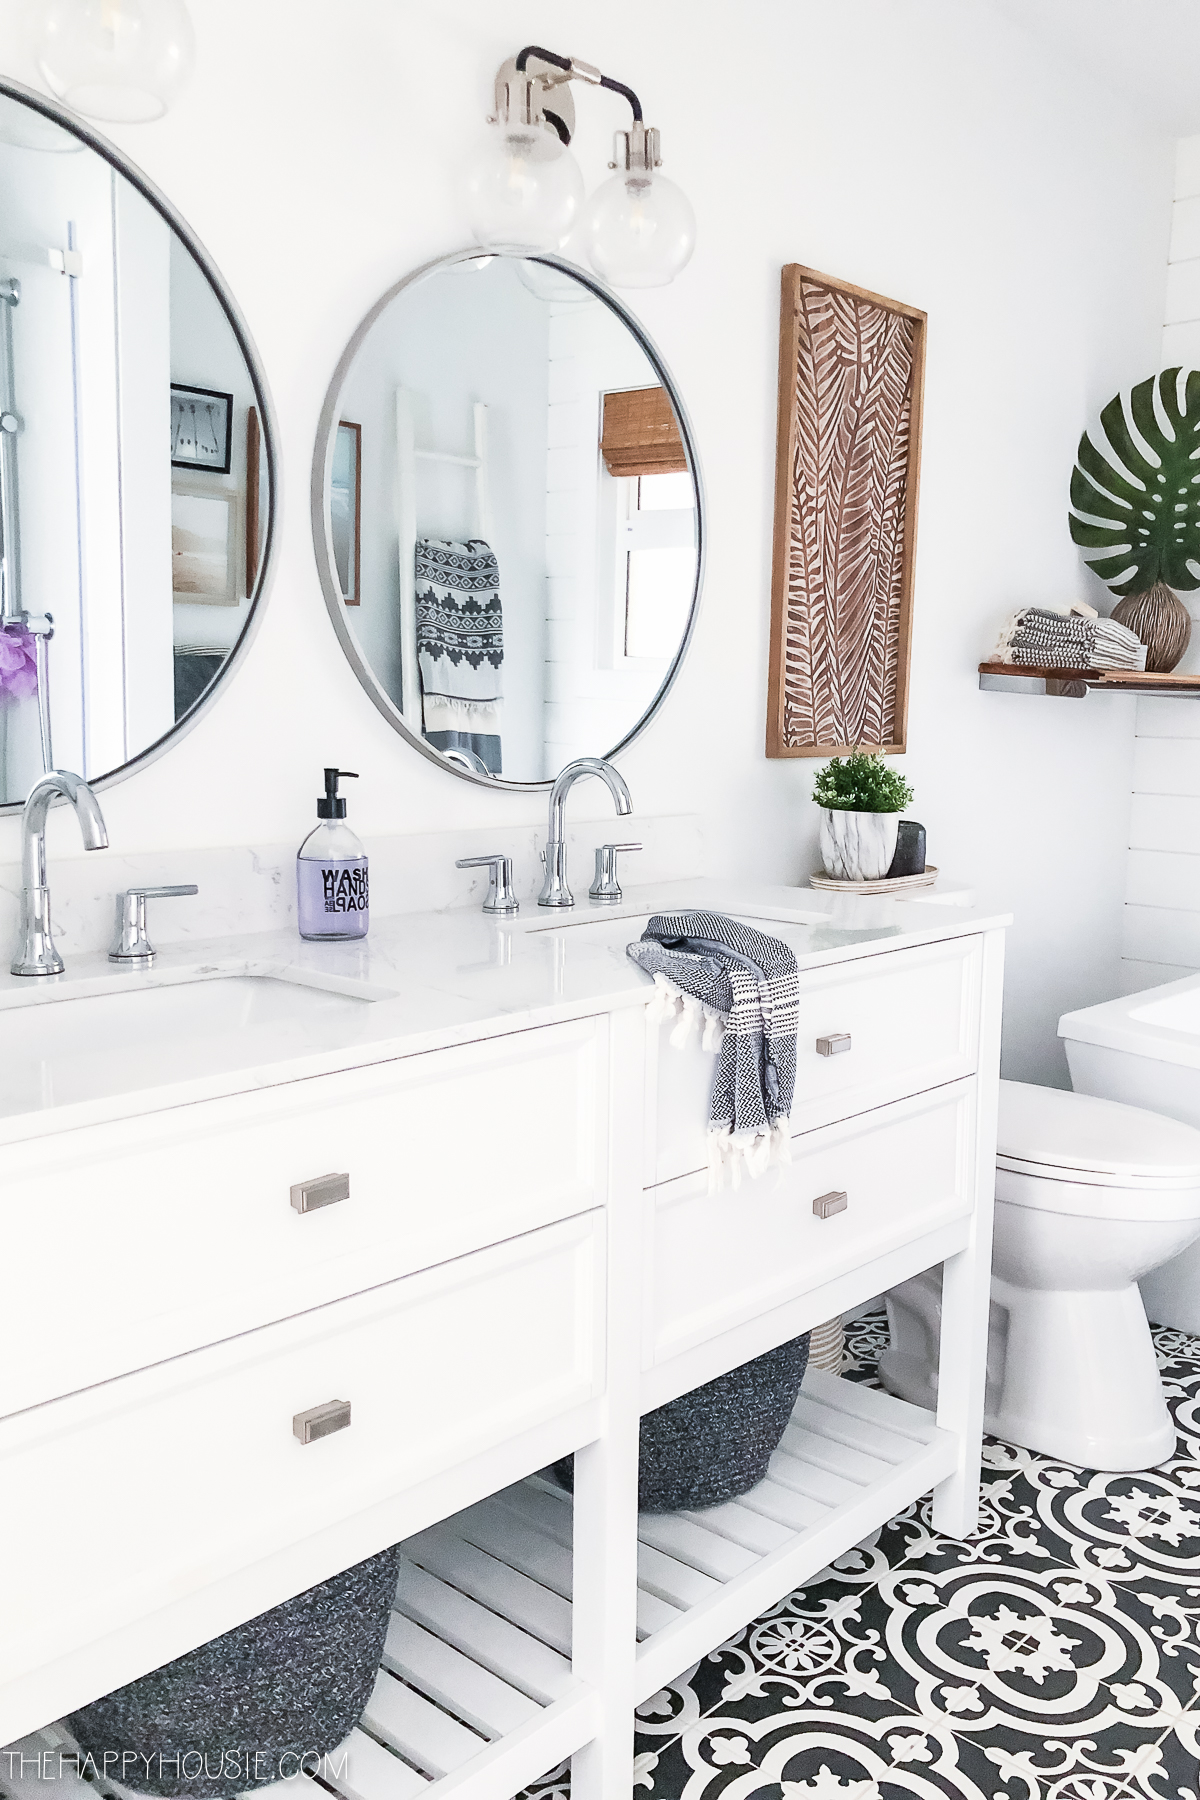 How to Organize Your Bathroom (even without much storage space